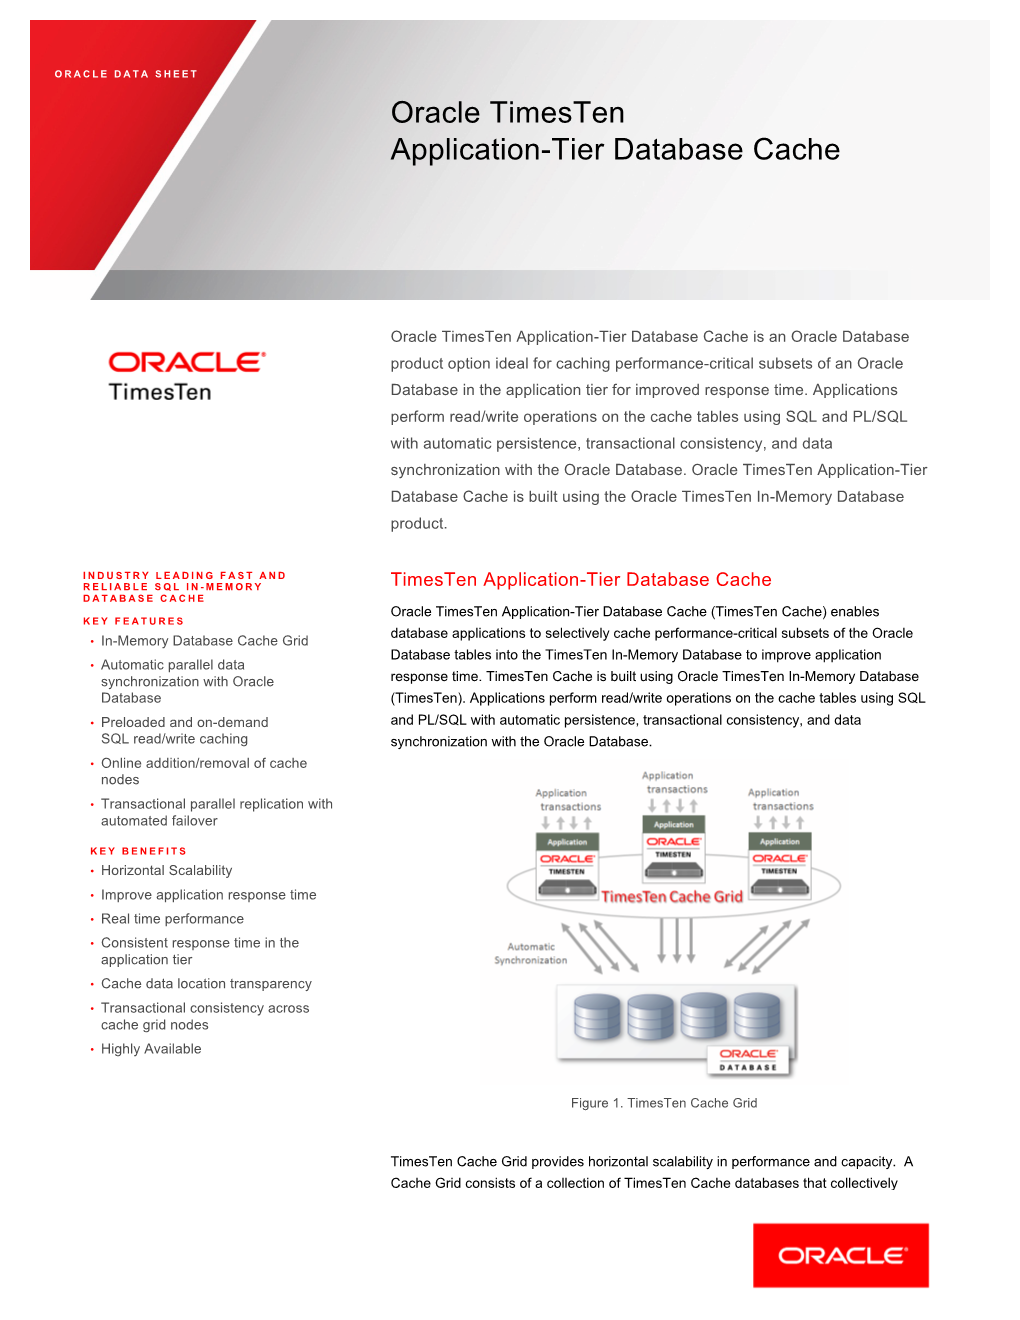 Oracle Timesten Application-Tier Database Cache